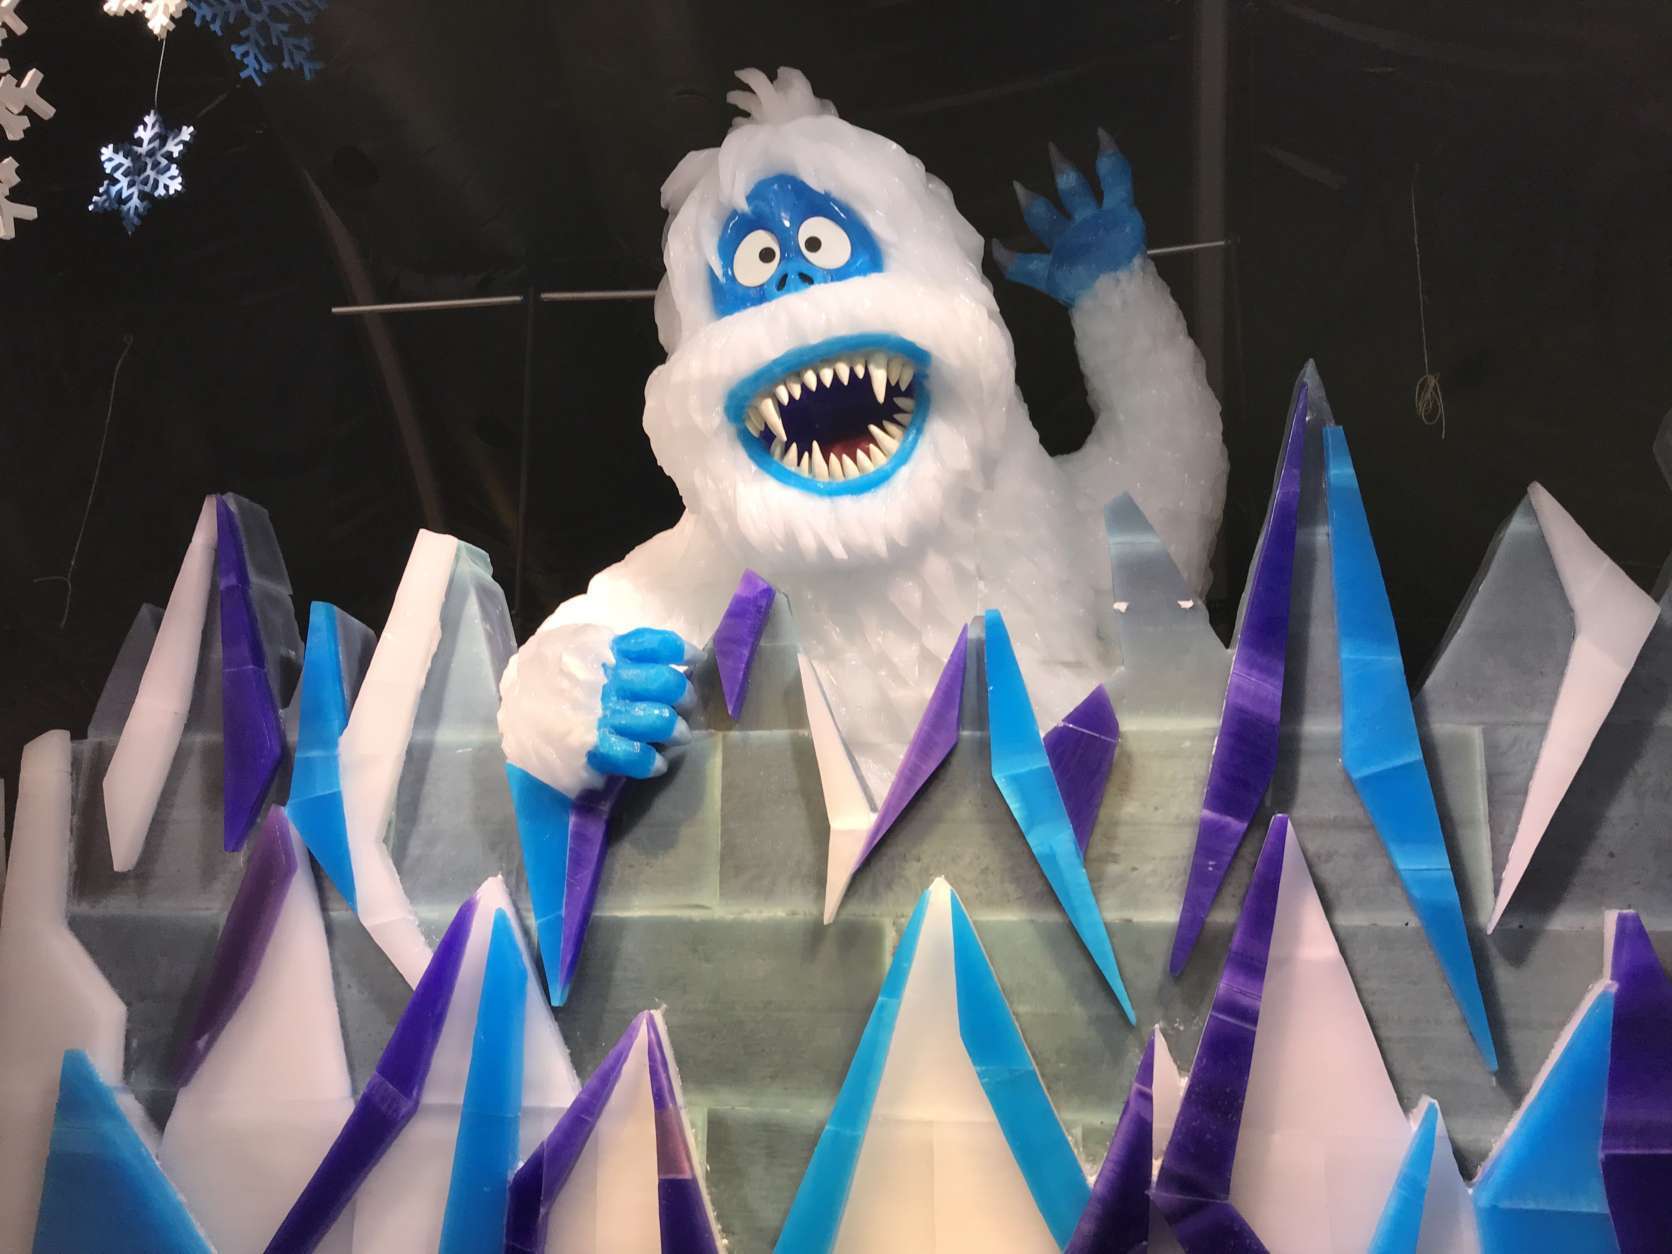 Bumble the Abominable Snow Monster appears in spectacular, icy fashion, in ICE! at the Gaylord National Resort. (WTOP/Michelle Basch)